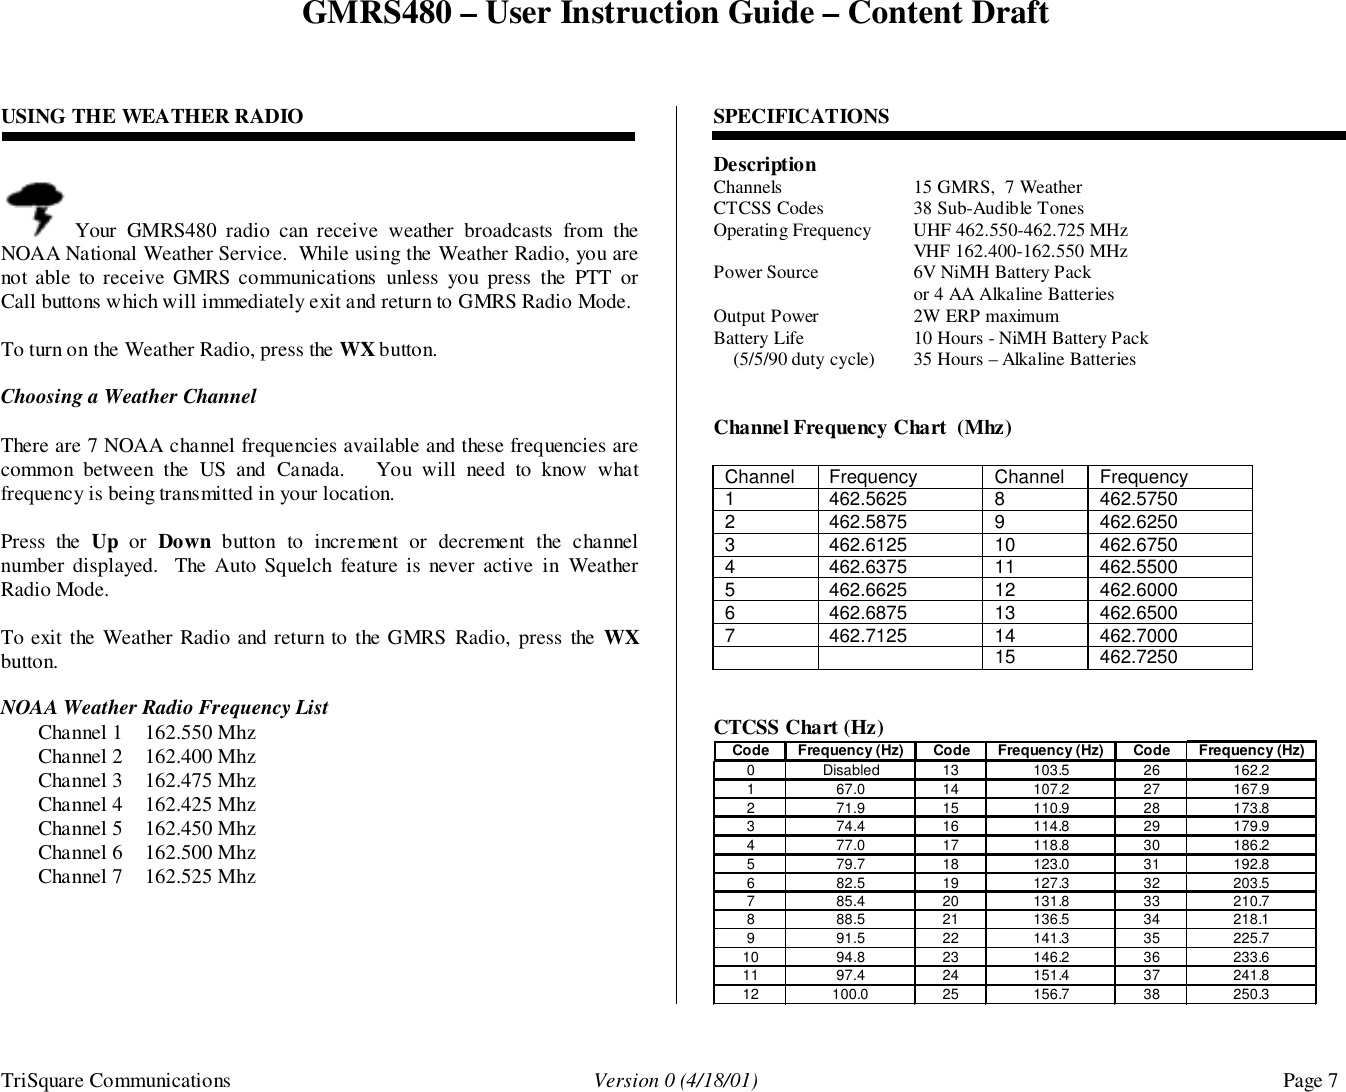 GMRS480 – User Instruction Guide – Content DraftTriSquare Communications Version 0 (4/18/01) Page 7USING THE WEATHER RADIO Your GMRS480 radio can receive weather broadcasts from theNOAA National Weather Service.  While using the Weather Radio, you arenot able to receive GMRS communications unless you press the PTT orCall buttons which will immediately exit and return to GMRS Radio Mode.To turn on the Weather Radio, press the WX button.Choosing a Weather ChannelThere are 7 NOAA channel frequencies available and these frequencies arecommon between the US and Canada.   You will need to know whatfrequency is being transmitted in your location.Press the Up or Down button to increment or decrement the channelnumber displayed.  The Auto Squelch feature is never active in WeatherRadio Mode.    To exit the Weather Radio and return to the GMRS Radio, press the WXbutton.NOAA Weather Radio Frequency ListChannel 1 162.550 MhzChannel 2 162.400 MhzChannel 3 162.475 MhzChannel 4 162.425 MhzChannel 5 162.450 MhzChannel 6 162.500 MhzChannel 7 162.525 MhzSPECIFICATIONSDescriptionChannels 15 GMRS,  7 WeatherCTCSS Codes 38 Sub-Audible TonesOperating Frequency UHF 462.550-462.725 MHzVHF 162.400-162.550 MHzPower Source 6V NiMH Battery Packor 4 AA Alkaline BatteriesOutput Power 2W ERP maximumBattery Life 10 Hours - NiMH Battery Pack    (5/5/90 duty cycle) 35 Hours – Alkaline BatteriesChannel Frequency Chart  (Mhz)Channel Frequency Channel Frequency1 462.5625 8 462.57502 462.5875 9 462.62503 462.6125 10 462.67504 462.6375 11 462.55005 462.6625 12 462.60006 462.6875 13 462.65007 462.7125 14 462.700015 462.7250CTCSS Chart (Hz)Code Frequency (Hz) Code Frequency (Hz) Code Frequency (Hz)0 Disabled 13 103.5 26 162.21 67.0 14 107.2 27 167.92 71.9 15 110.9 28 173.83 74.4 16 114.8 29 179.94 77.0 17 118.8 30 186.25 79.7 18 123.0 31 192.86 82.5 19 127.3 32 203.57 85.4 20 131.8 33 210.78 88.5 21 136.5 34 218.19 91.5 22 141.3 35 225.710 94.8 23 146.2 36 233.611 97.4 24 151.4 37 241.812 100.0 25 156.7 38 250.3